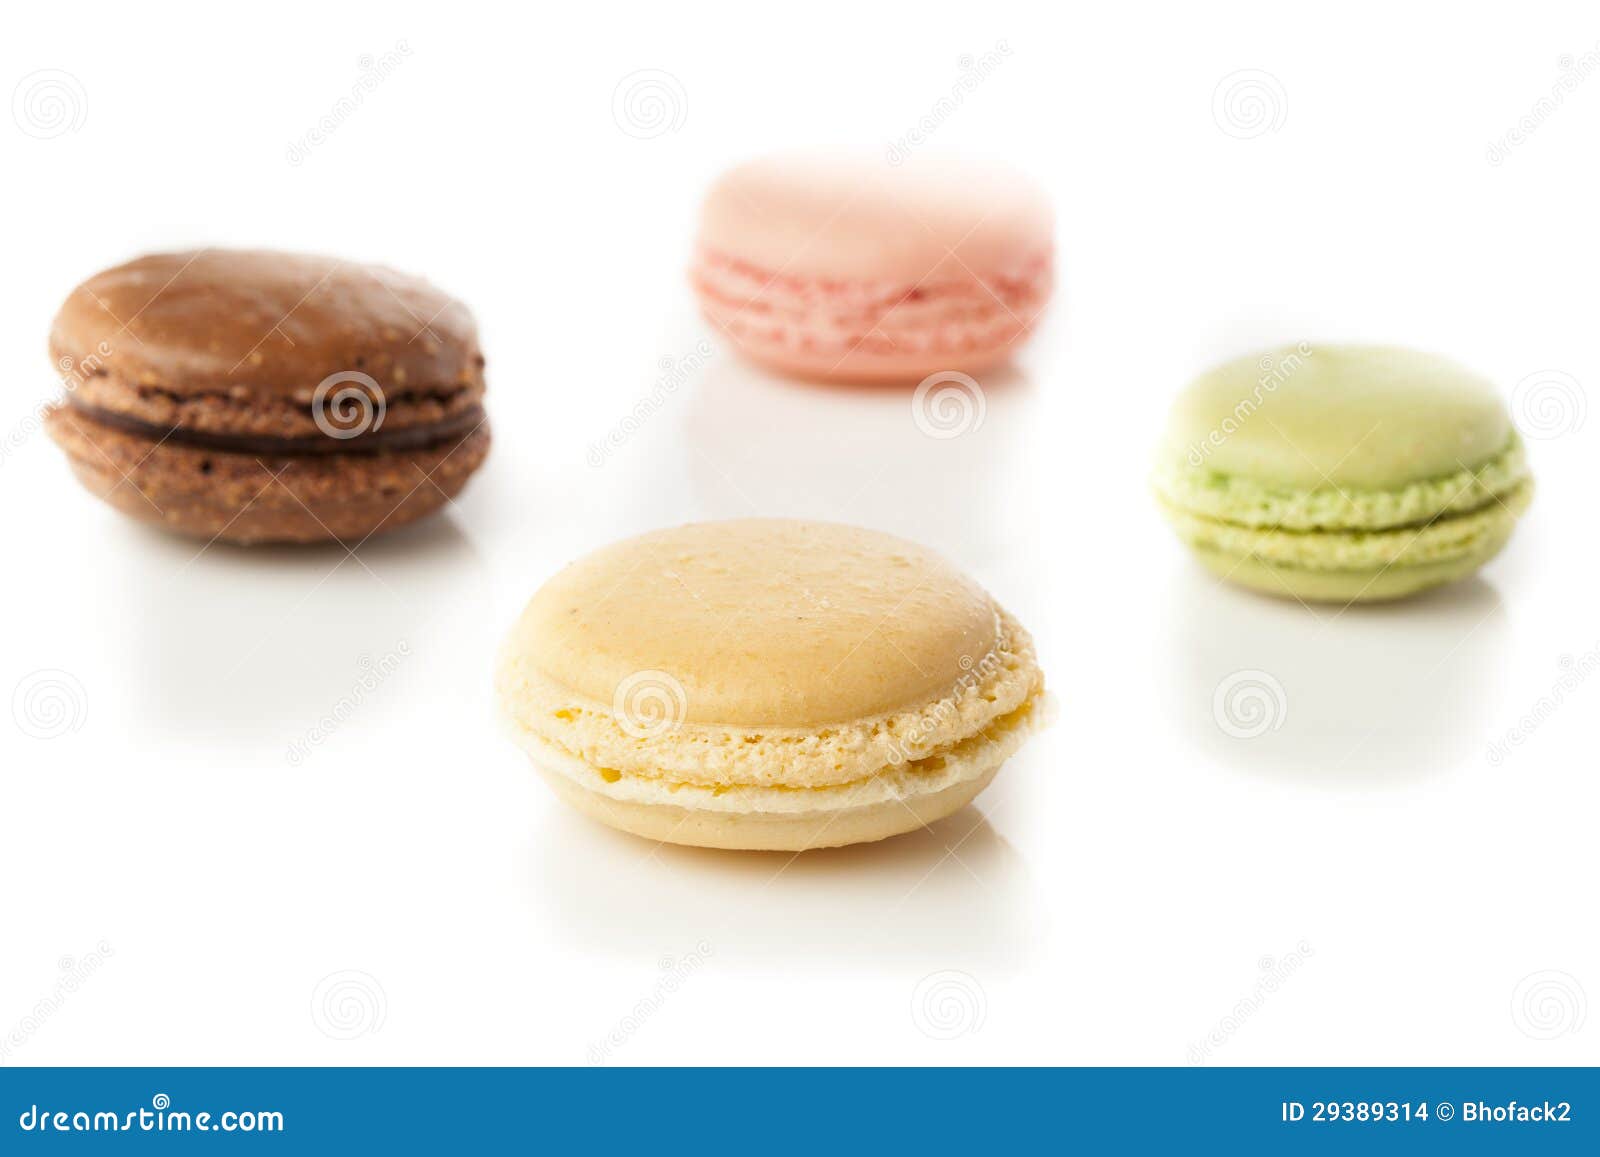 Gourmet Colored Macaroon Cookies Stock Photo - Image of confection ...